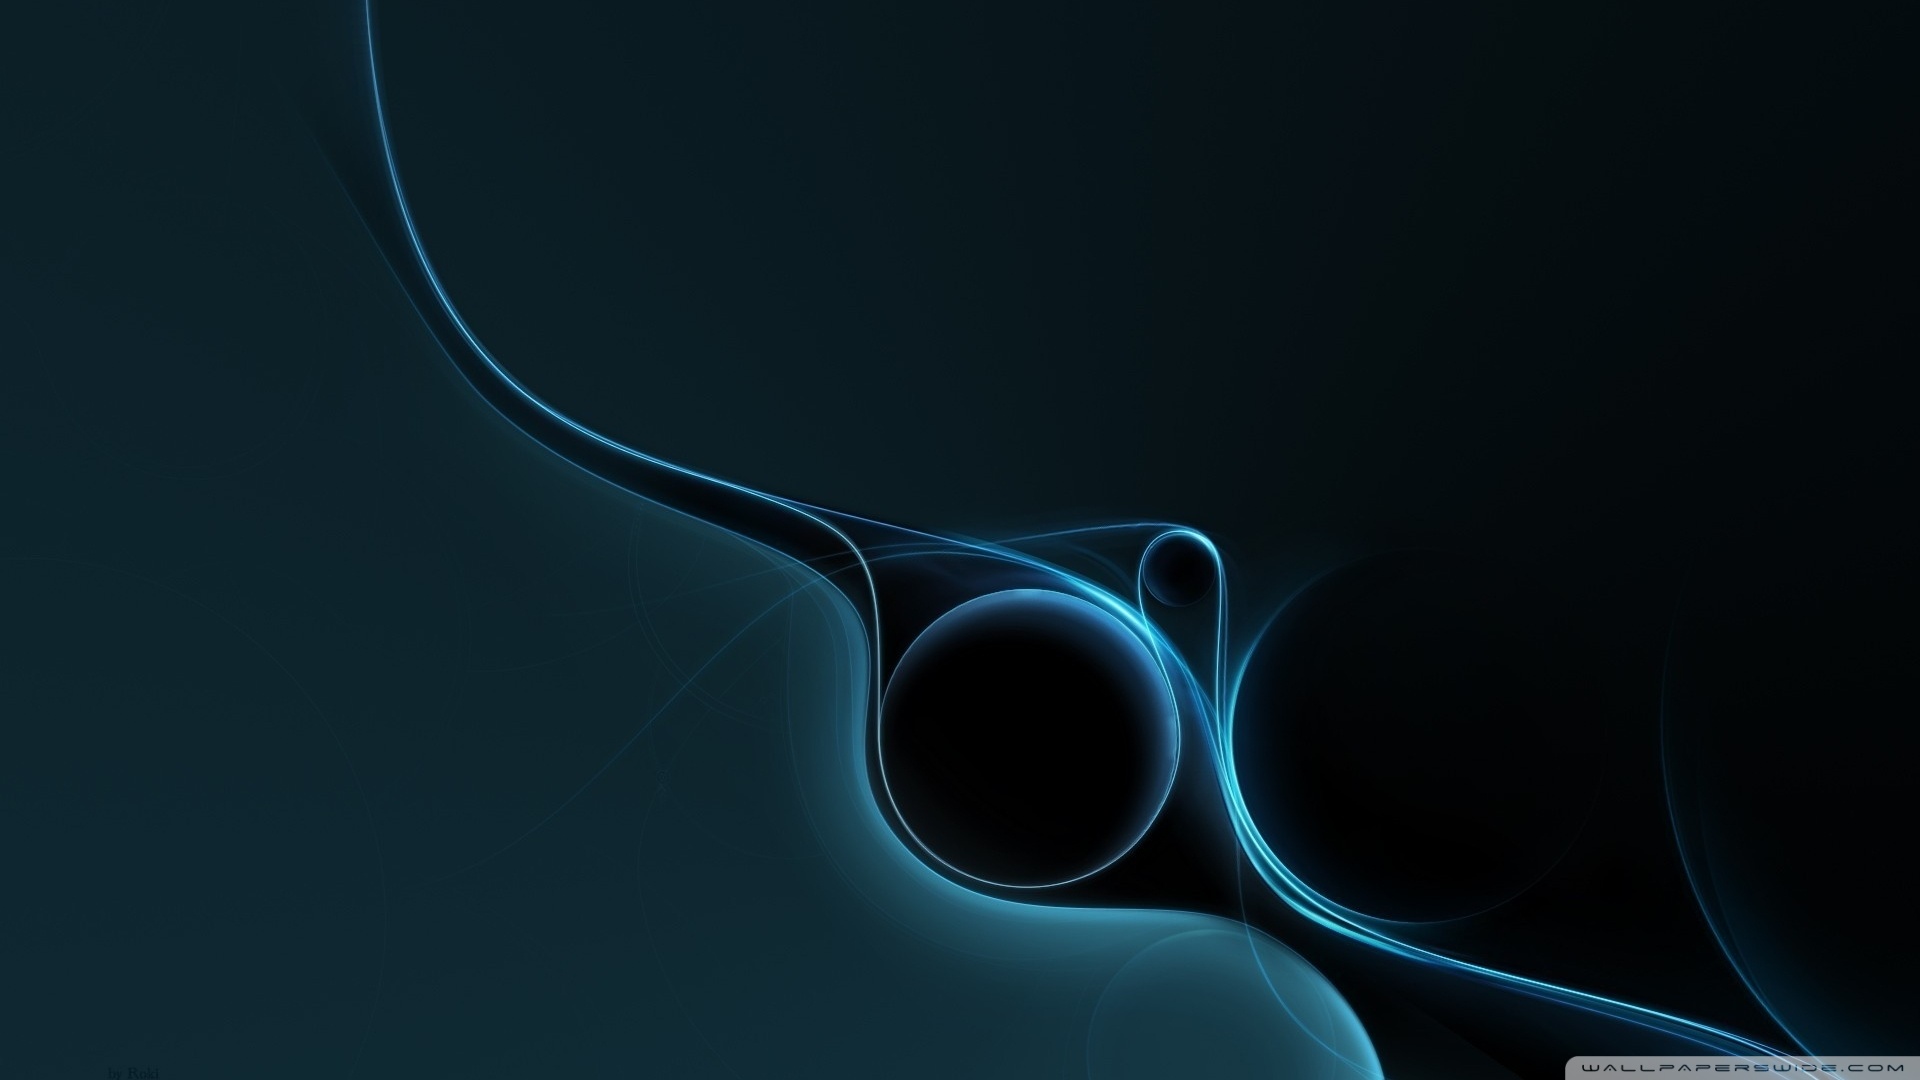  201208Awesome Black themed abstract wallpapers in HD 1dutcom 19jpg